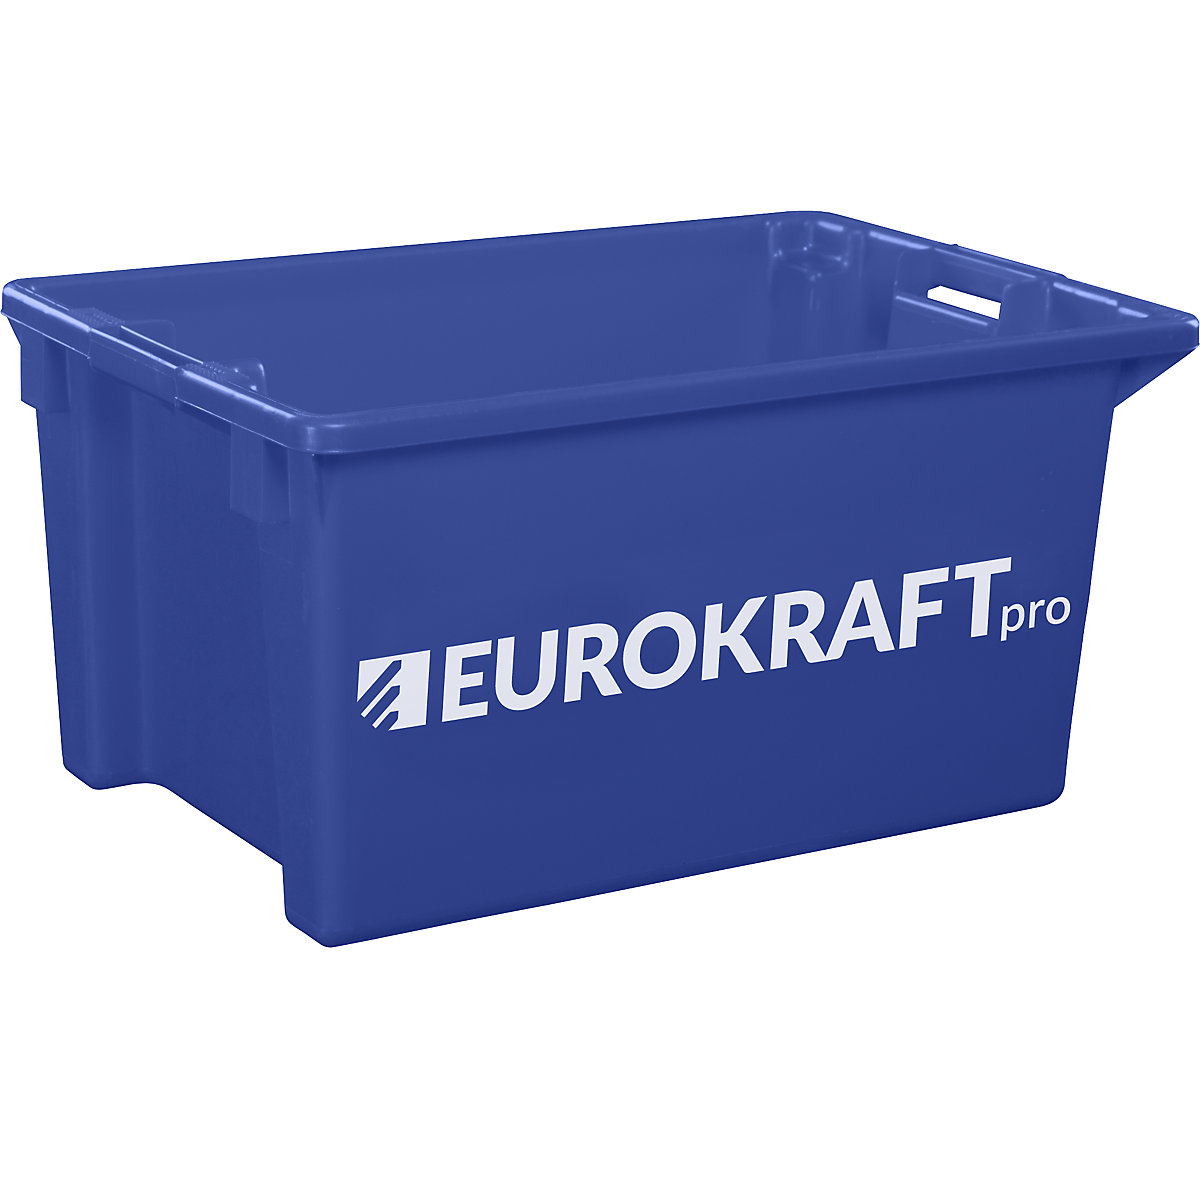 Stack/nest container made of polypropylene suitable for foodstuffs – eurokraft pro, capacity 70 l, pack of 2, solid walls and base, blue